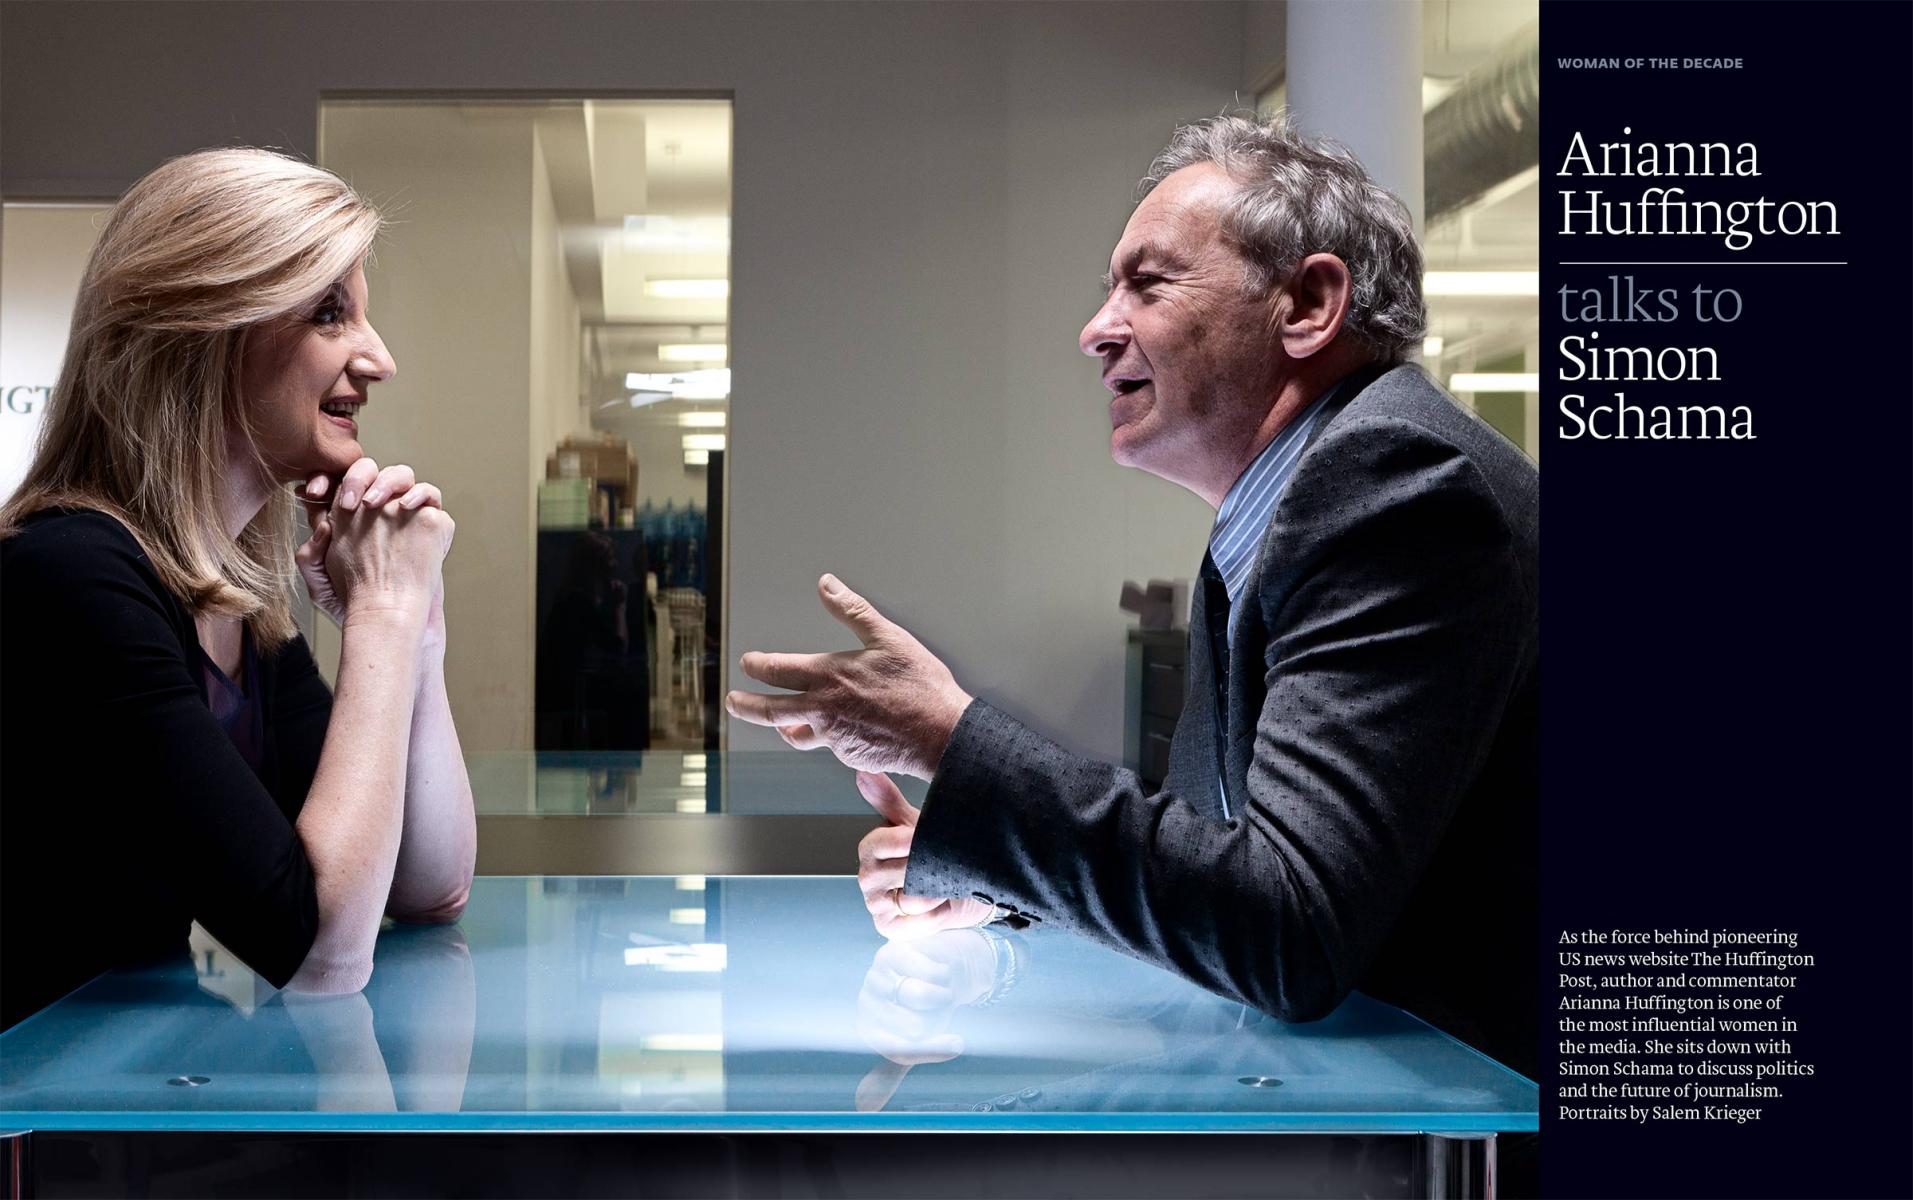 Arianna Huffington interview with art historian Simon Schama for The Financial Times of London weekend magazine. : Corporate Portraits : New York City based photographer and video specializing in portrait corporate portraits, video, editorial stories for on location and architectural photography